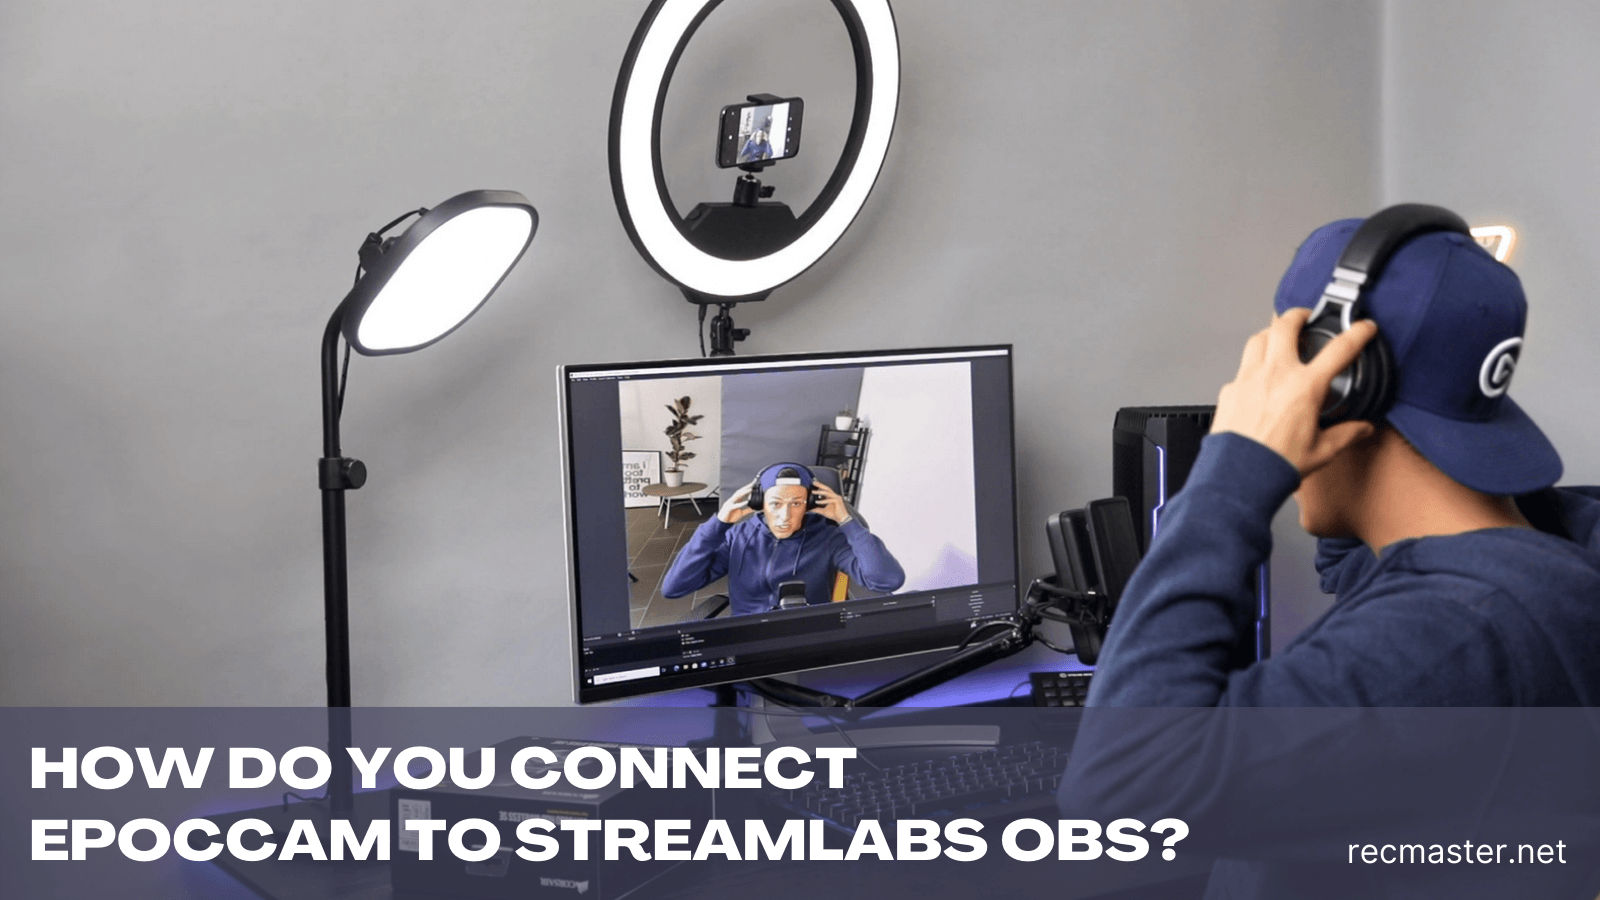 How Do You Connect EpocCam to Streamlabs OBS?